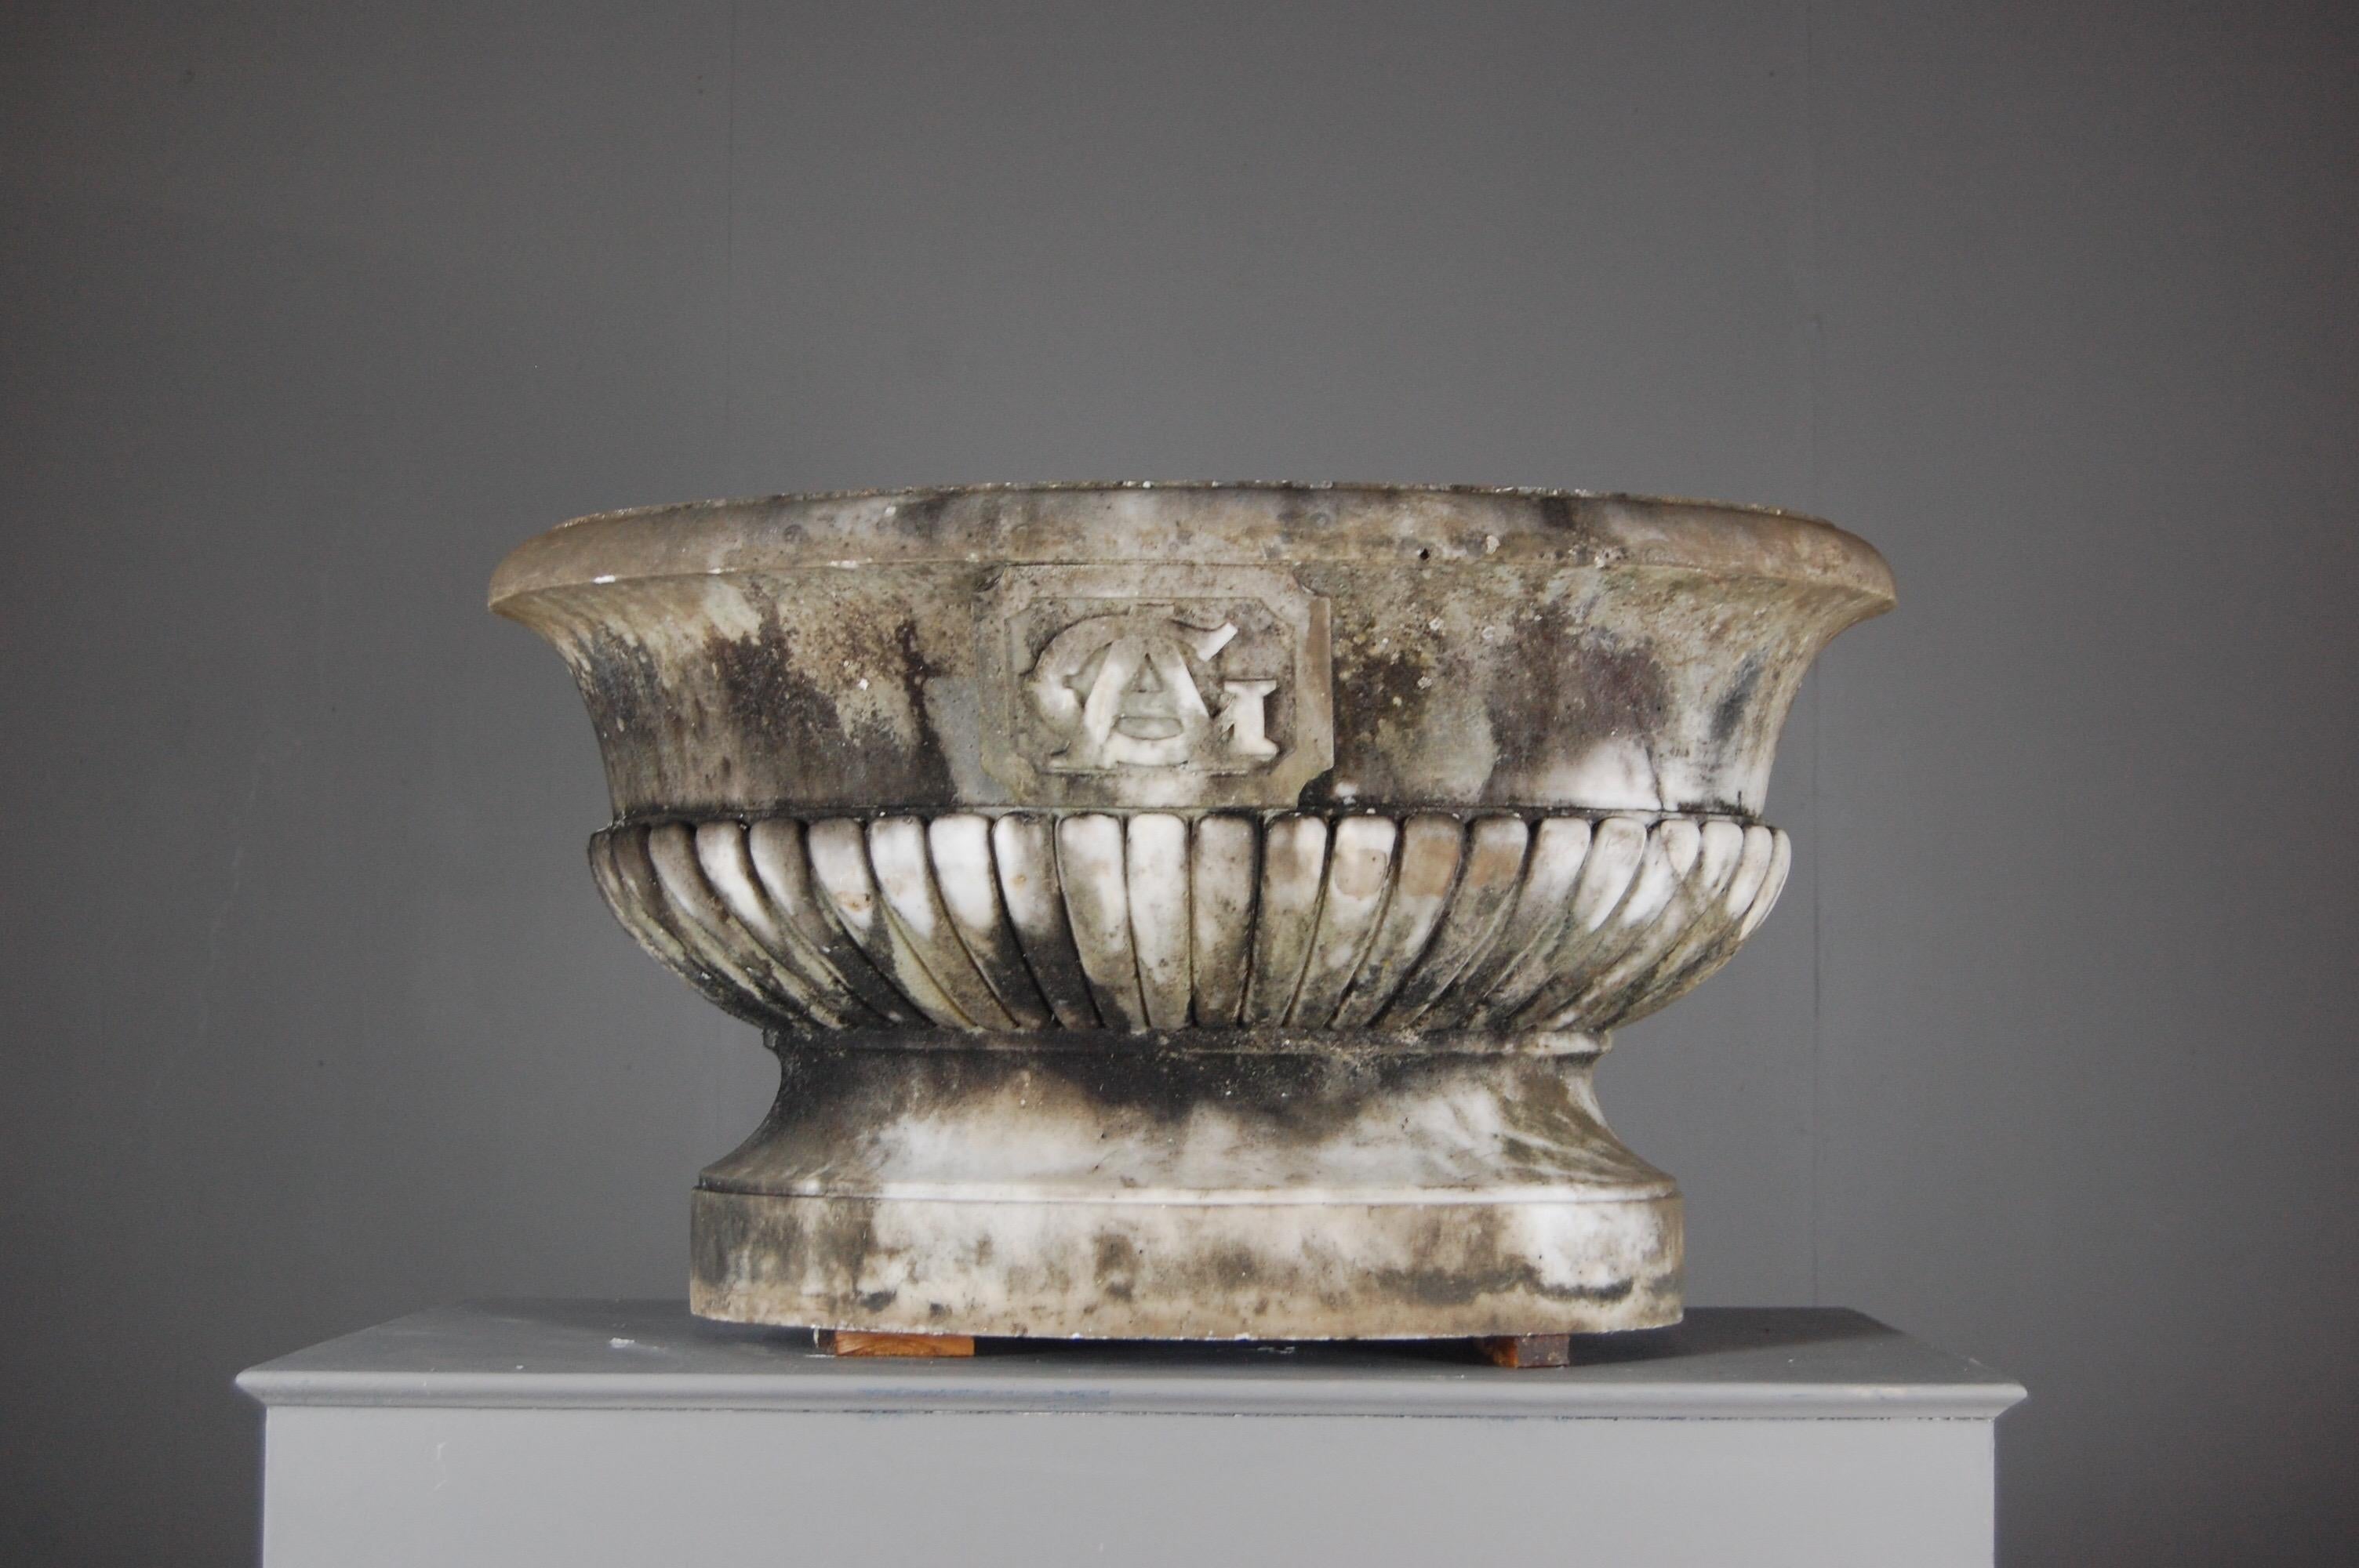 Wonderful scale 19th century Classical carved marble Urn, decorative gadroon carving to the bowl, expected weathering and patina throughout. Originating from Burgundy with the family initials or crest carved the entwined letters GA.
Dimensions: